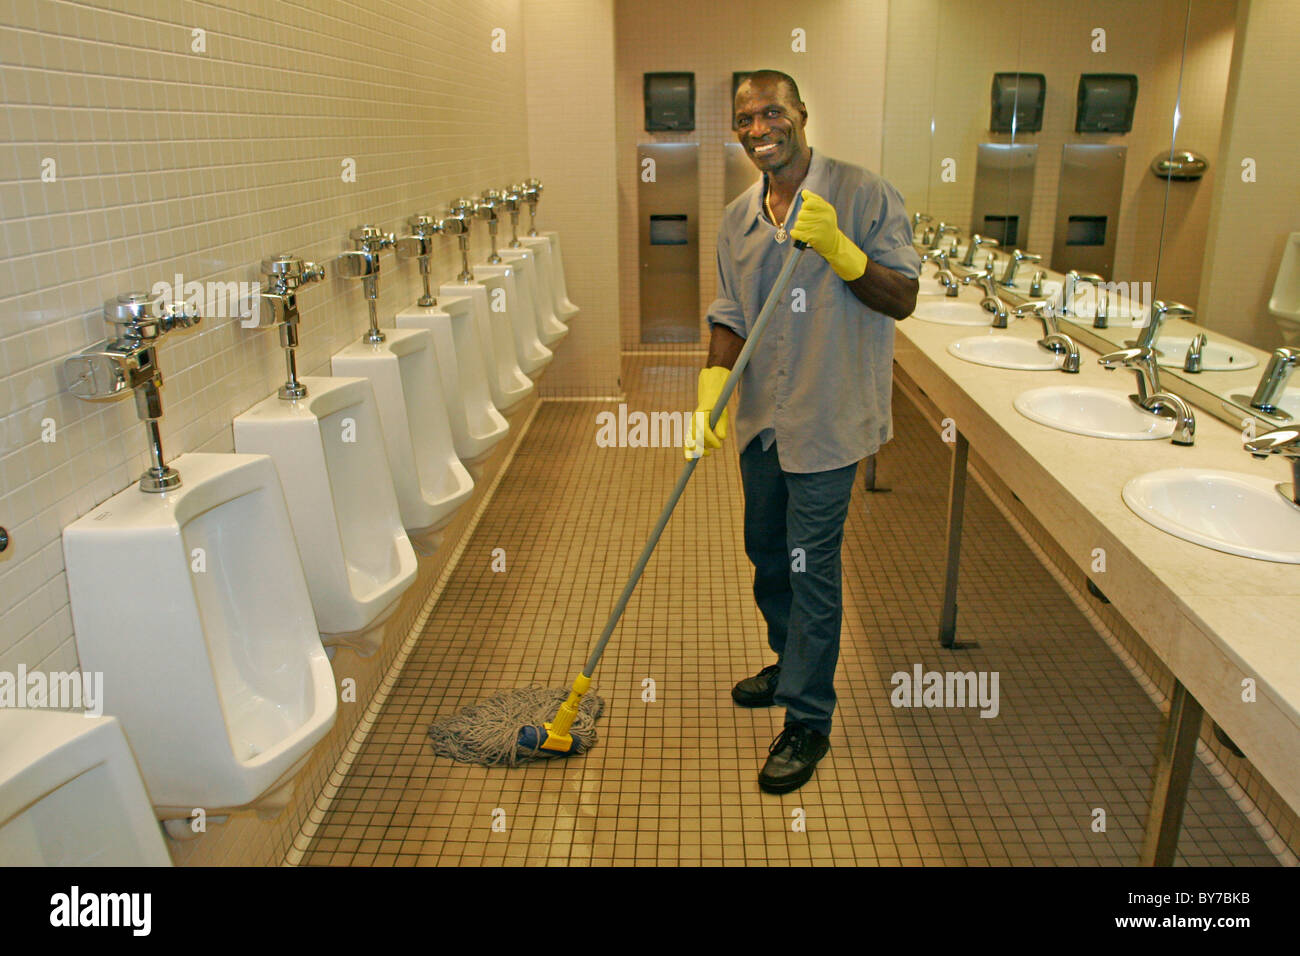 Janitor Cleaning Mens Room Stock Photo Alamy